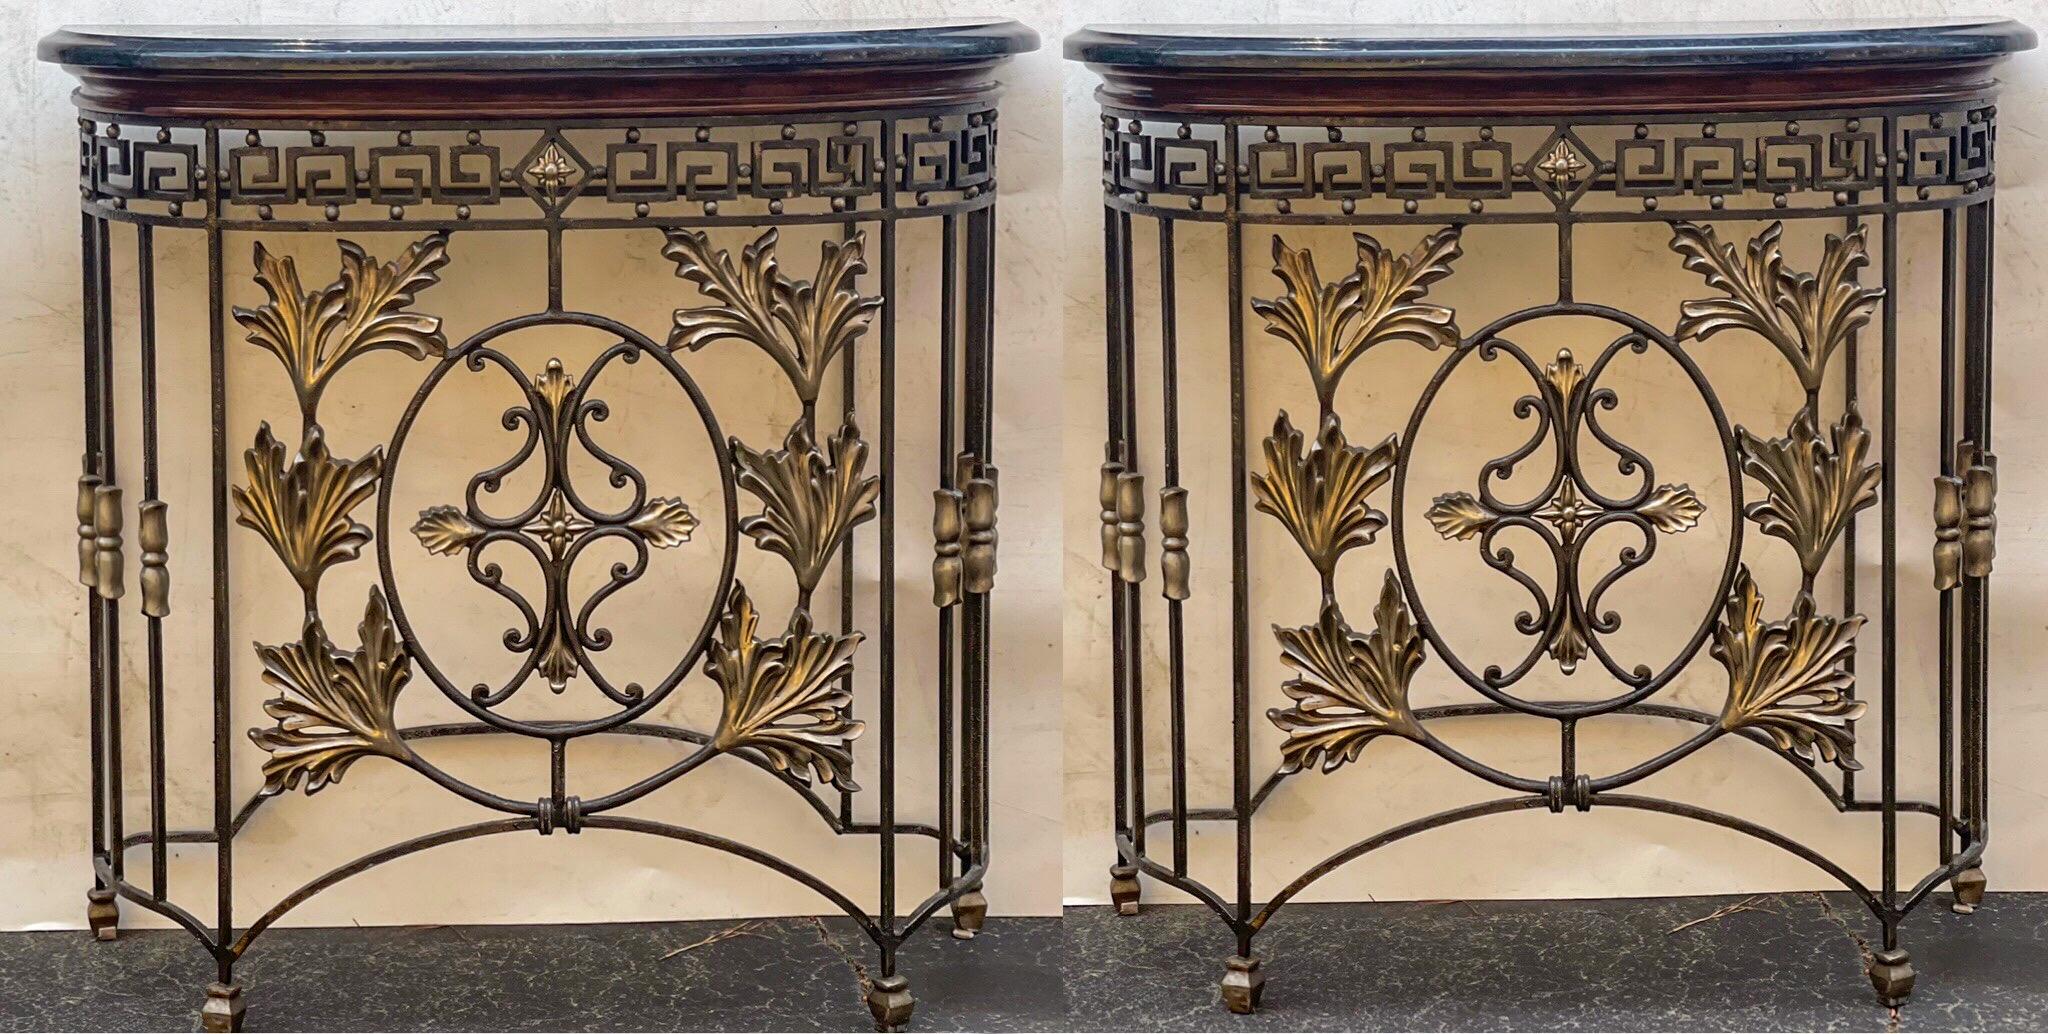 Neoclassical Neo-Classical Style Iron, Bronze & Marble Console Tables Att. Maitland-Smith -2